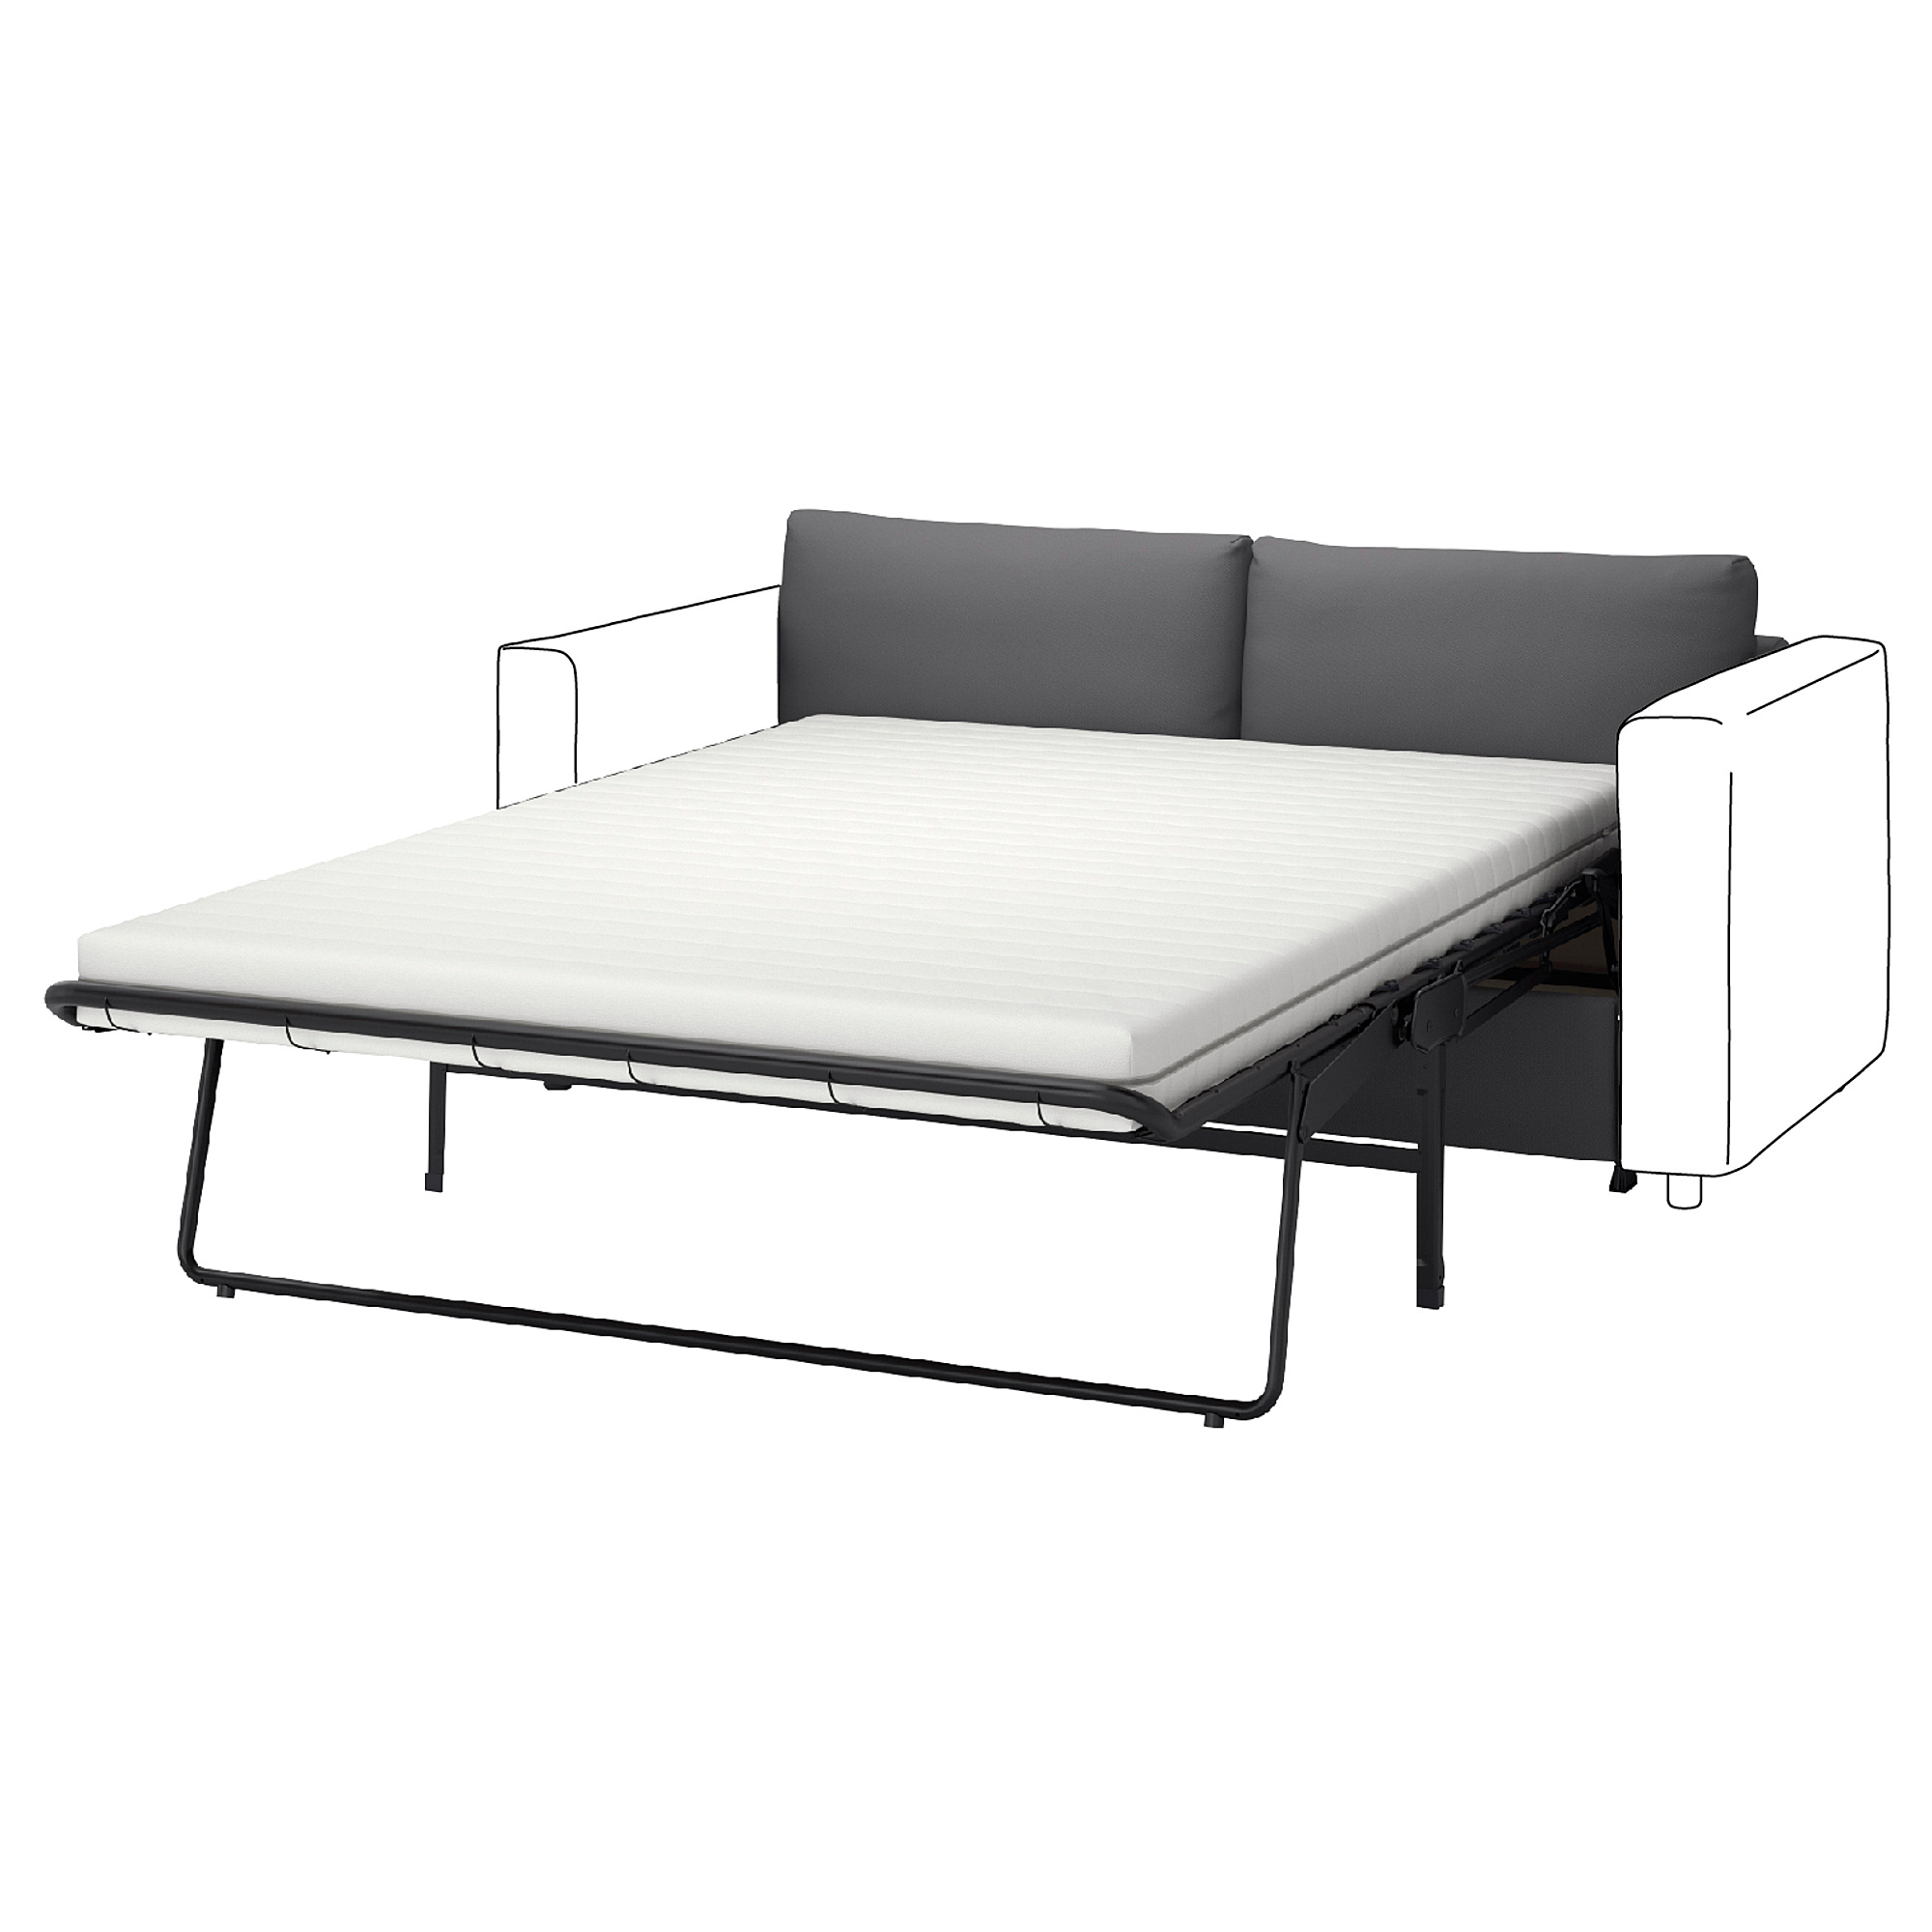 VIMLE cover for 2-seat sofa-bed section